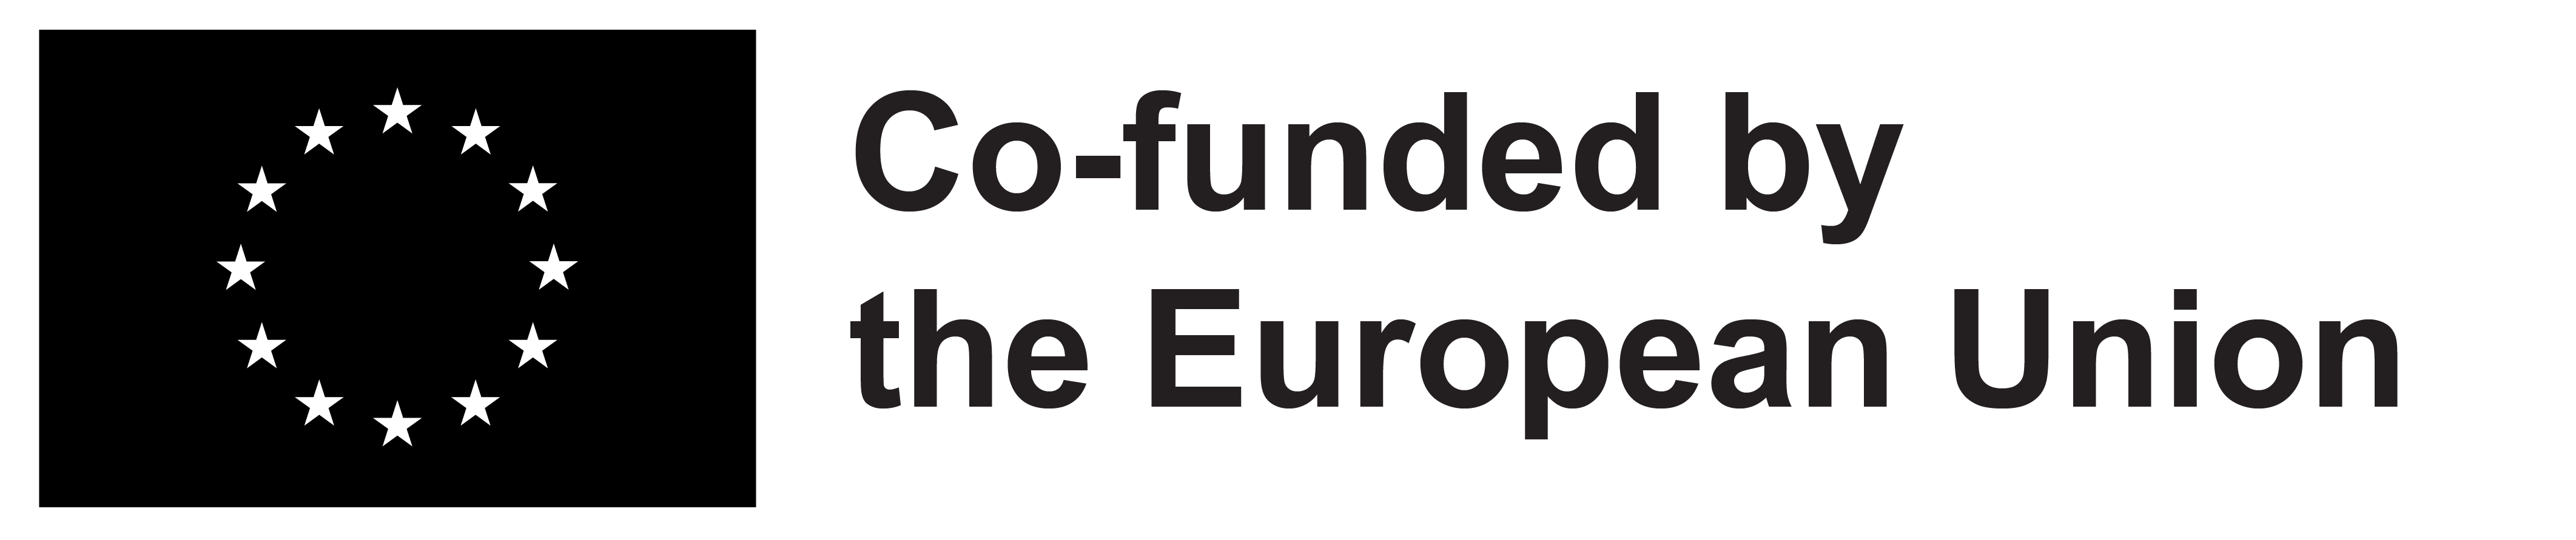 Co-funded by the EU Logo